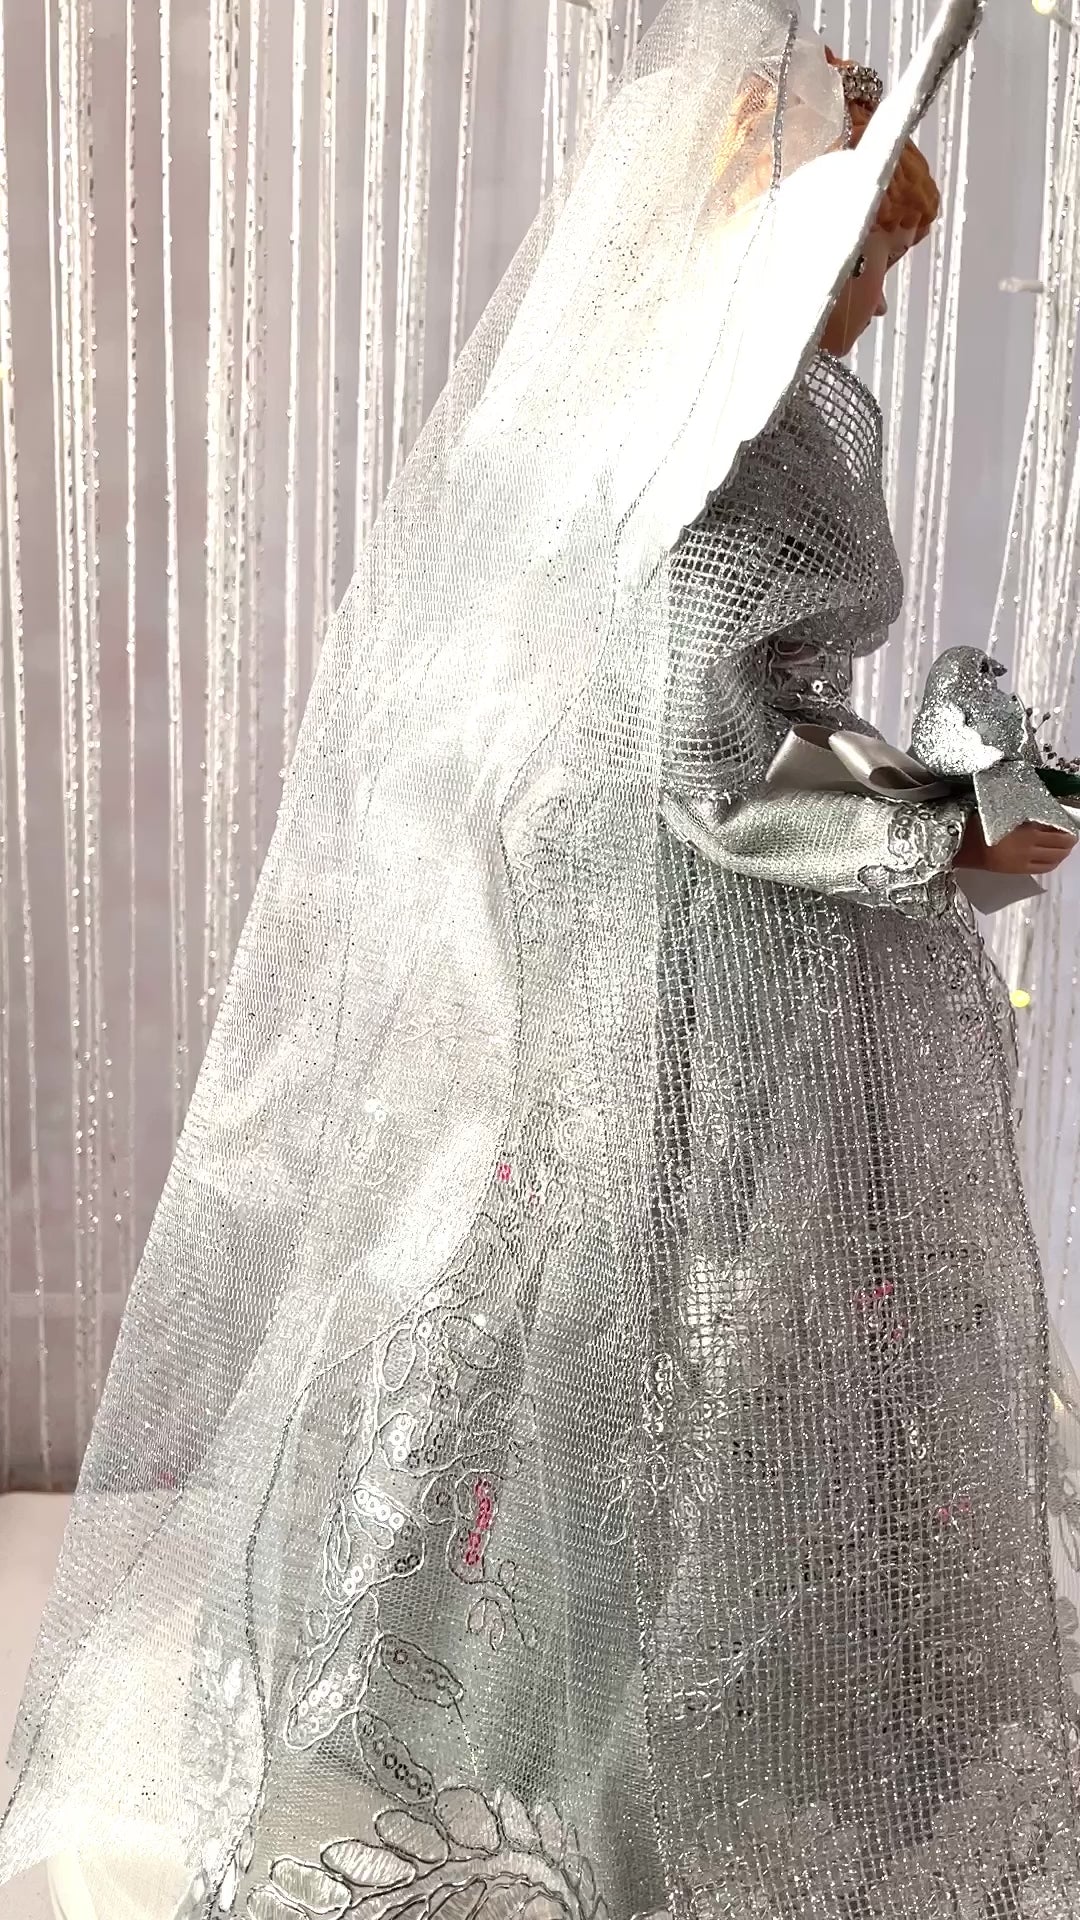 Video of Blonde Christmas Angel dressed in silver gown with silver wings holding a silver bird.